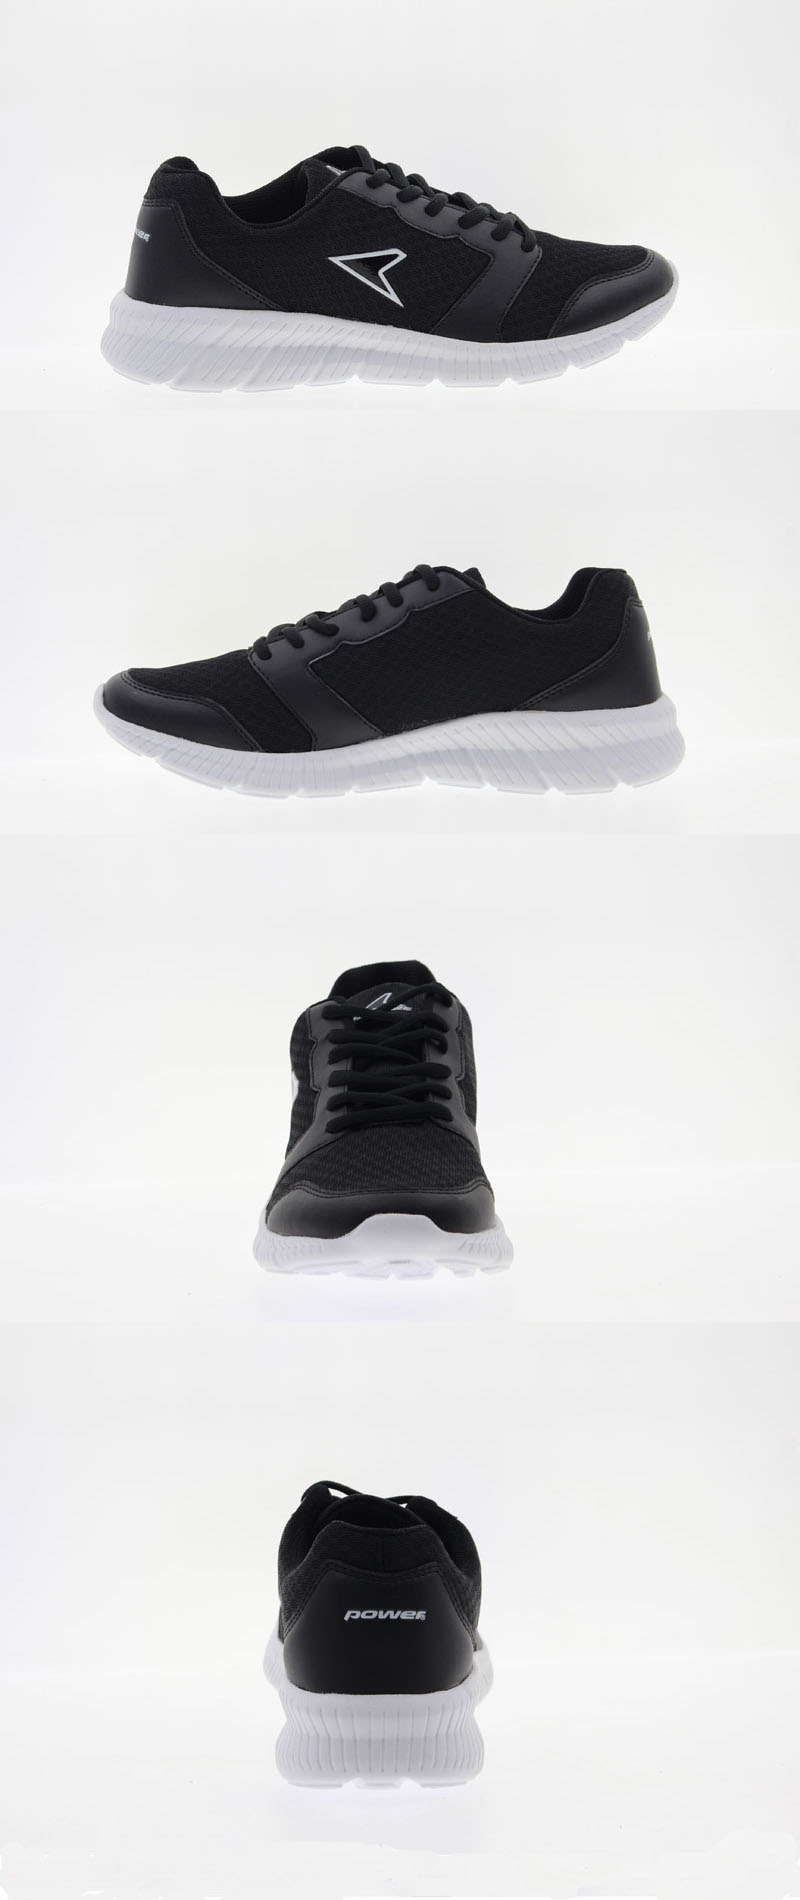 A Black white look collection shoes